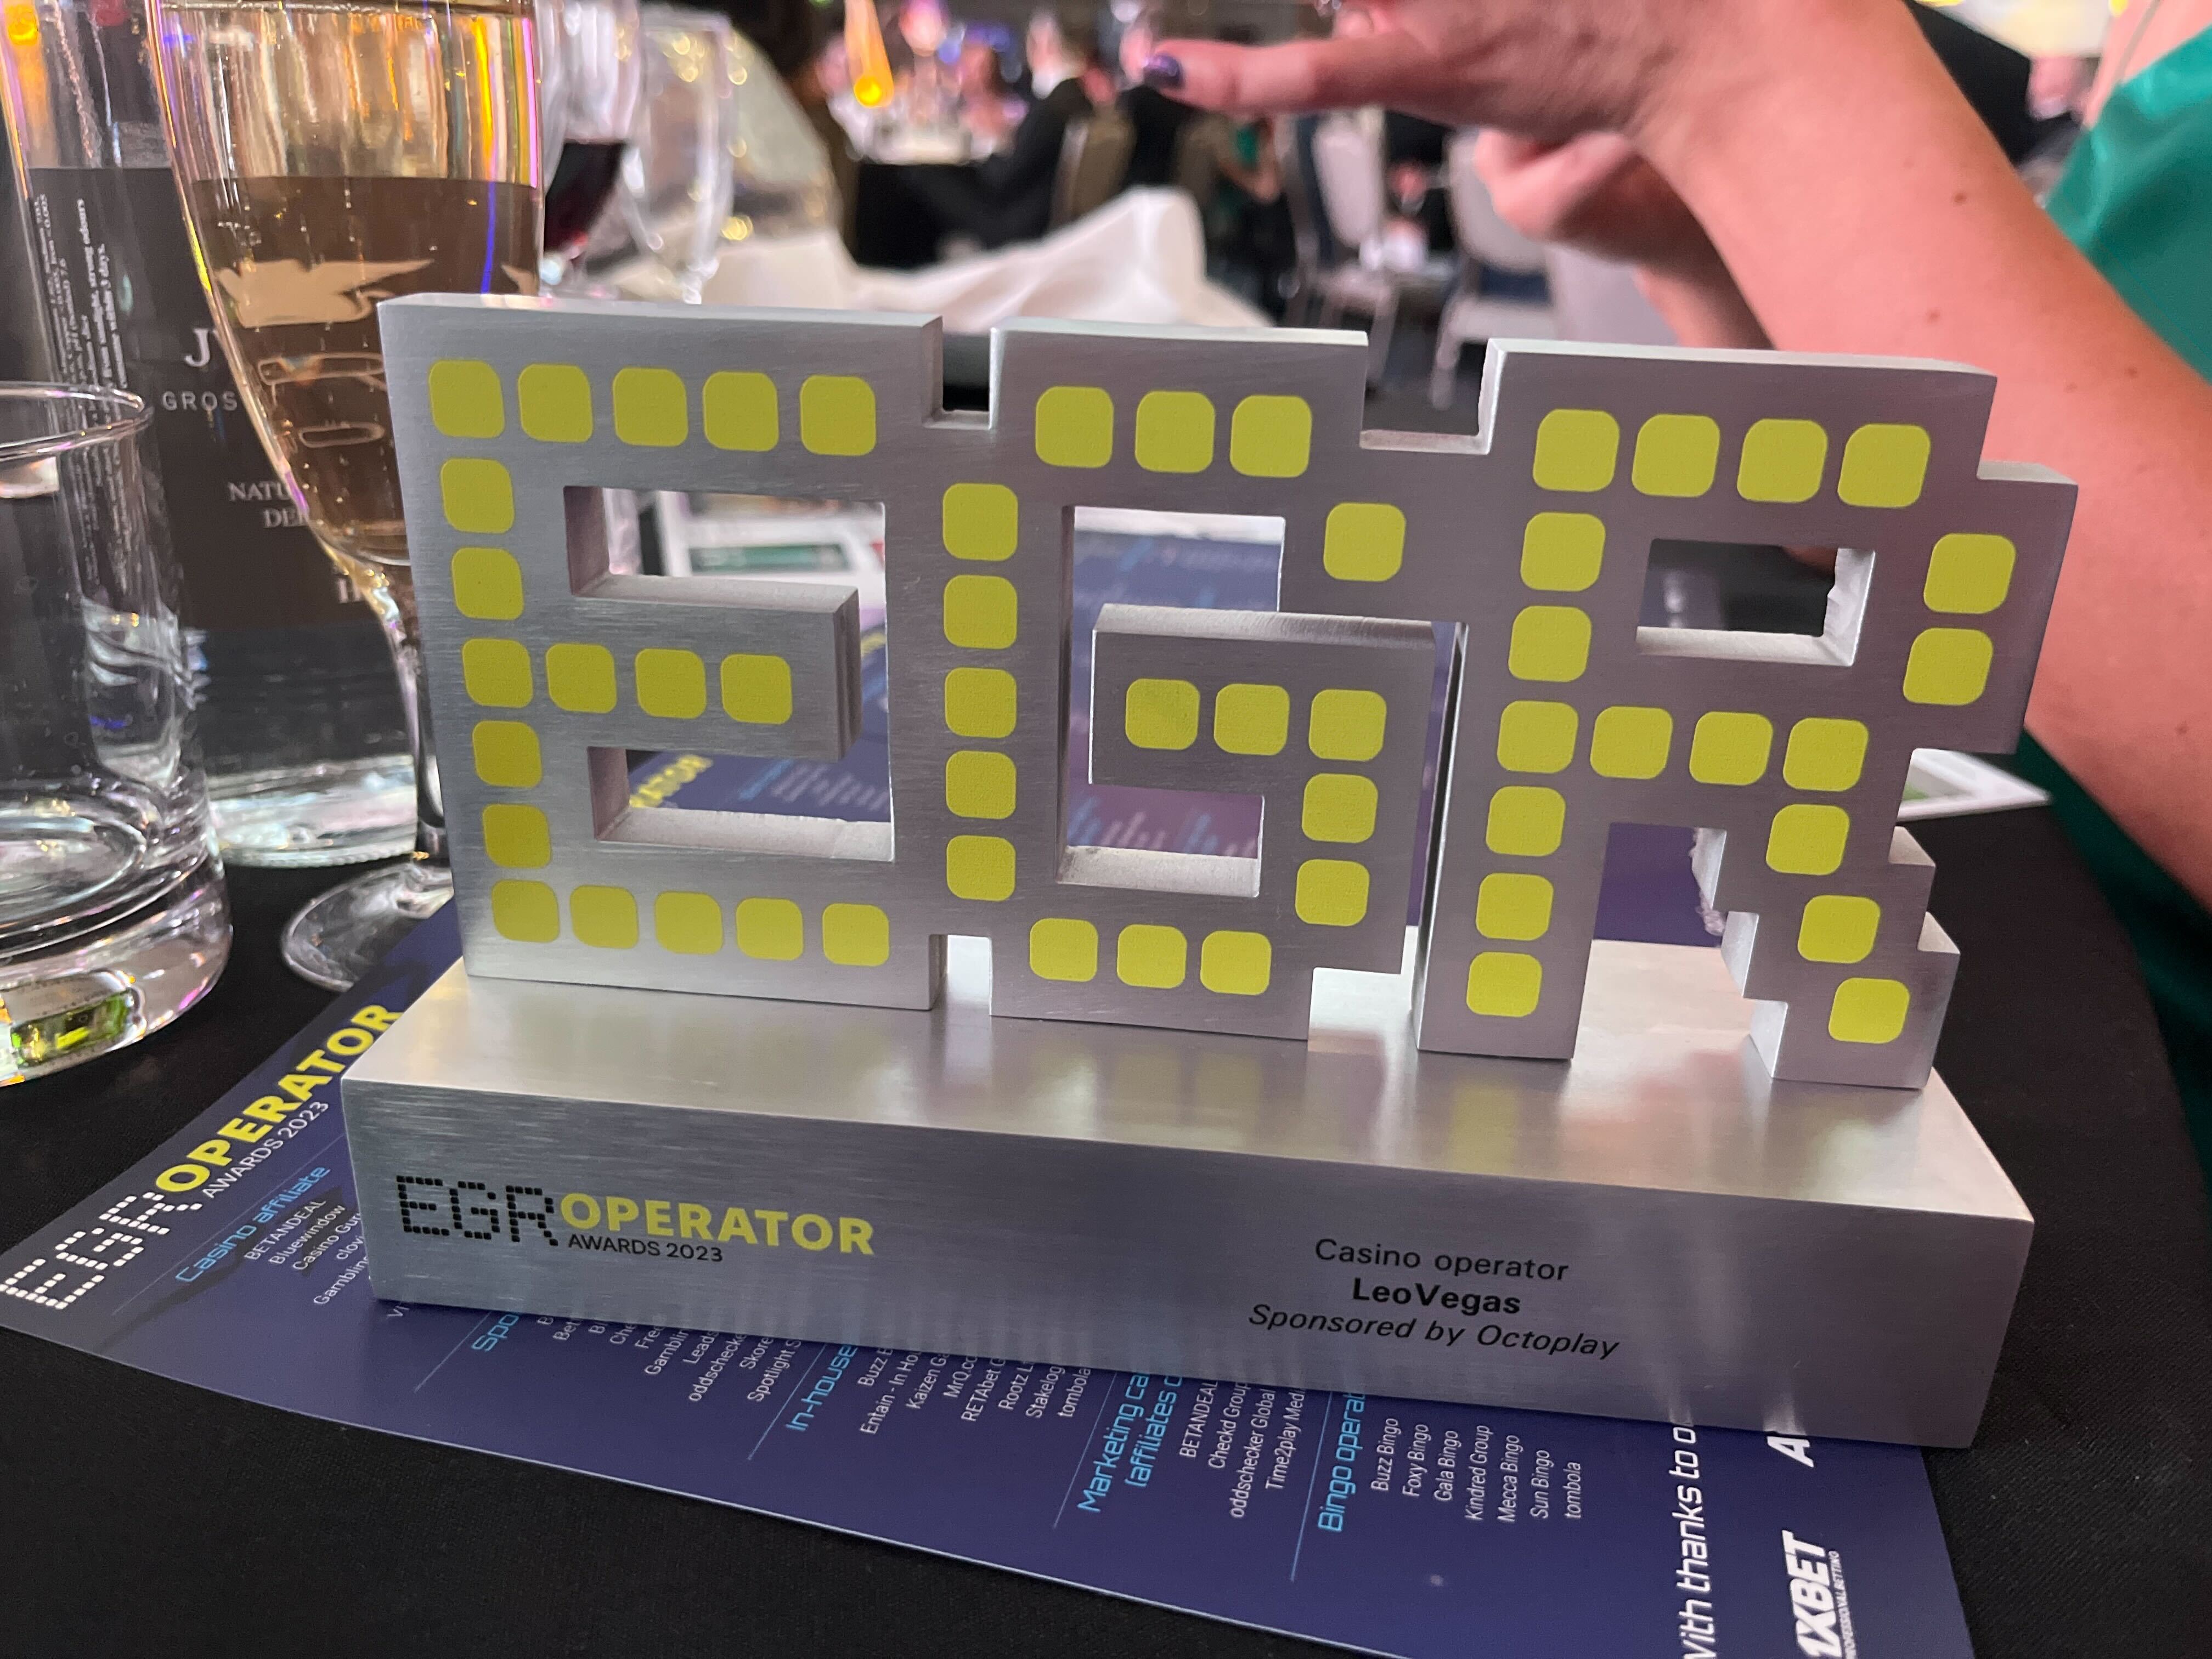 Double jackpot for LeoVegas at the EGR Operator Awards 2023